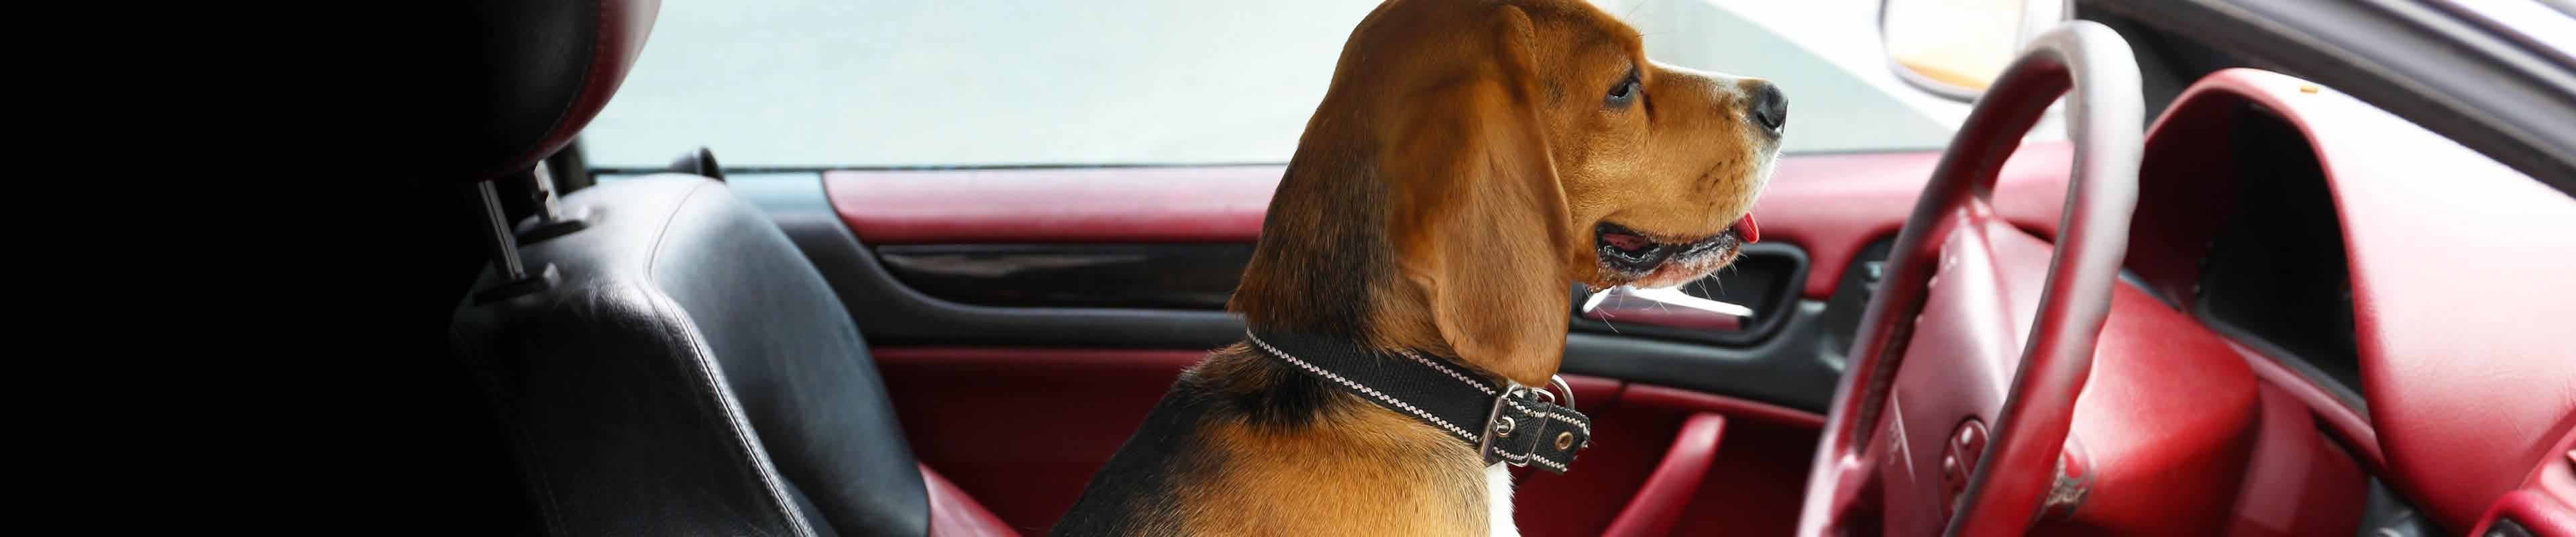 5 Tips for Driving with Dogs